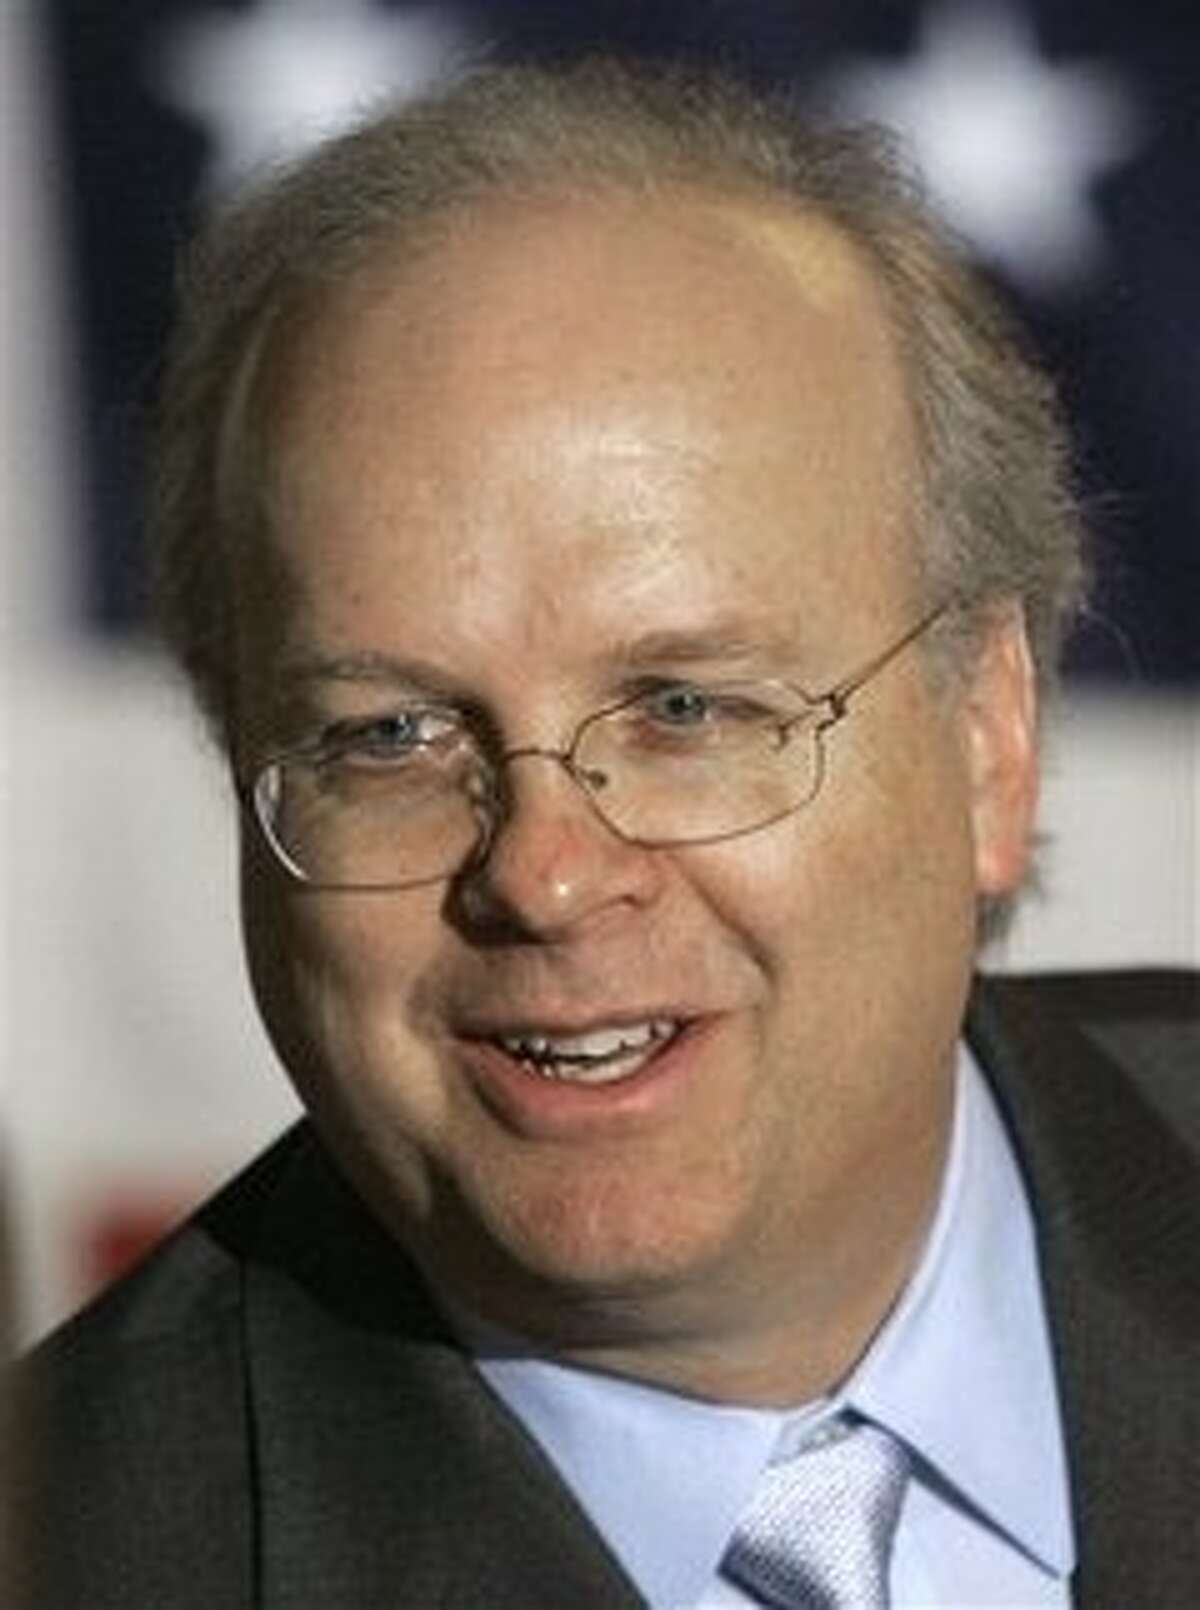 Karl Rove, former presidential advisor, will speak in Beaumont next year during the Texas Energy Museum's Blowout fund raising dinner. (AP Photo/Carlos Osorio, File)